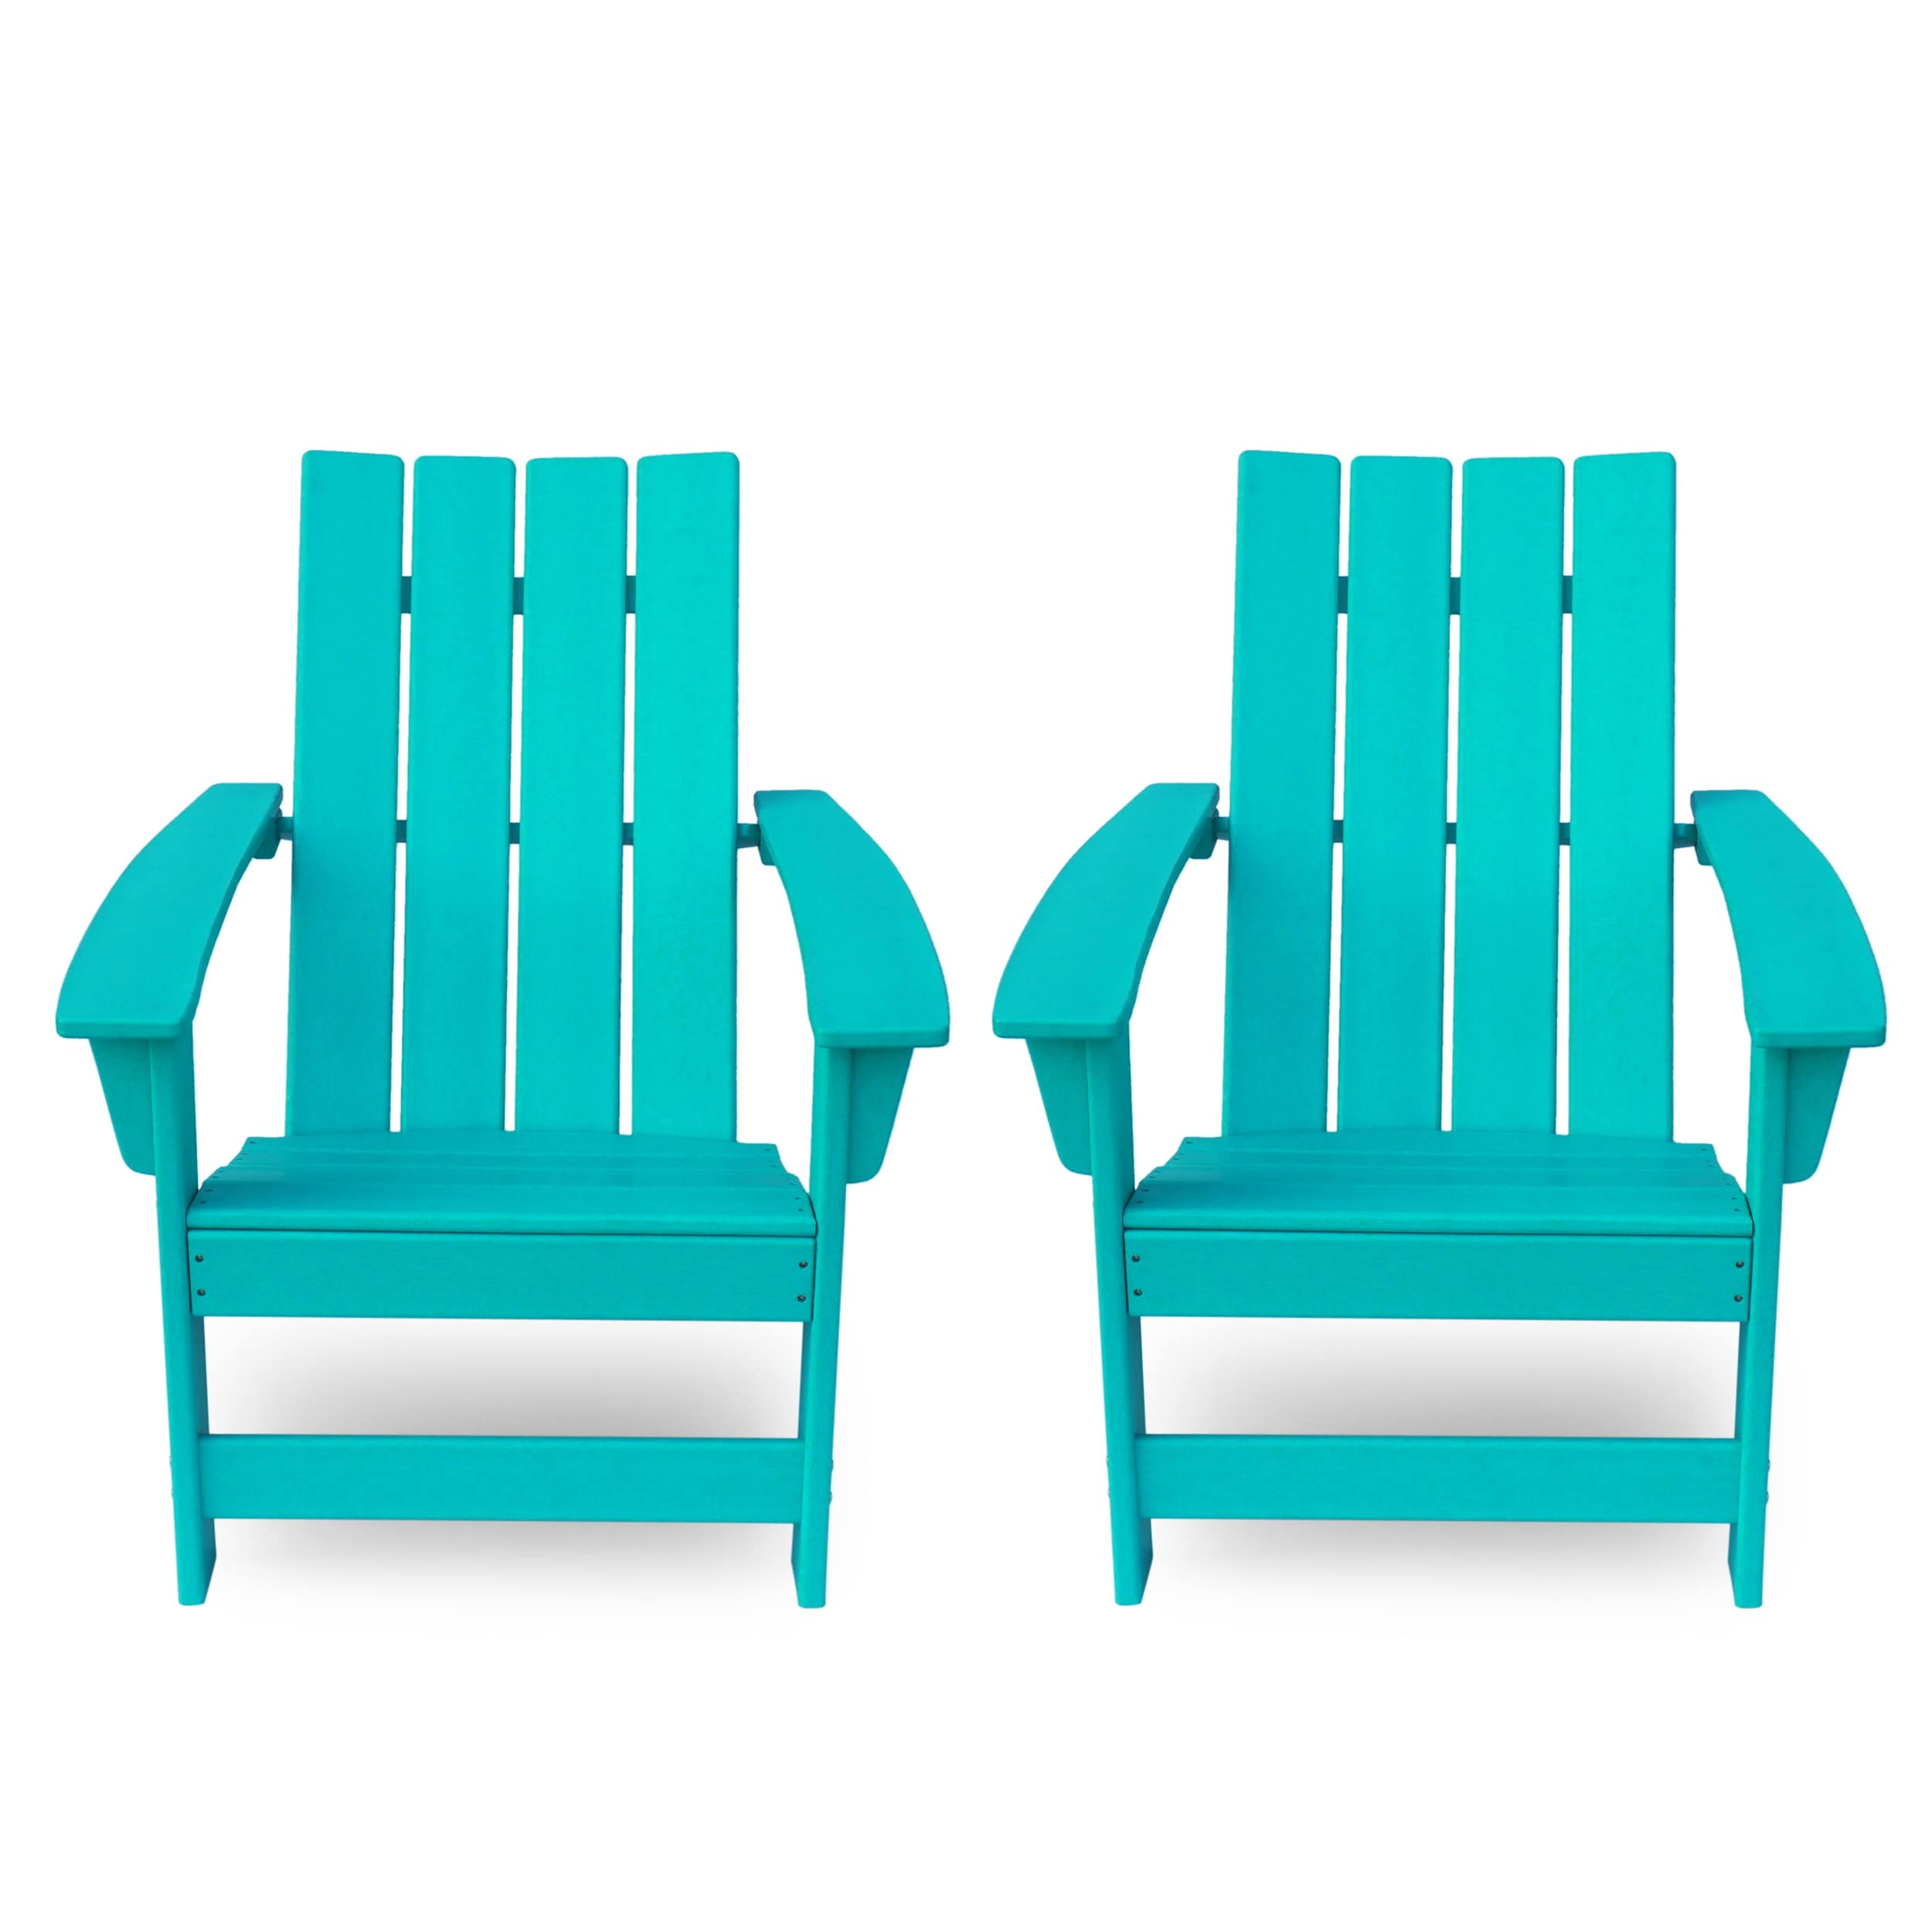 Encino Outdoor Adirondack Chairs (set Of 2) By Christopher Knight Home